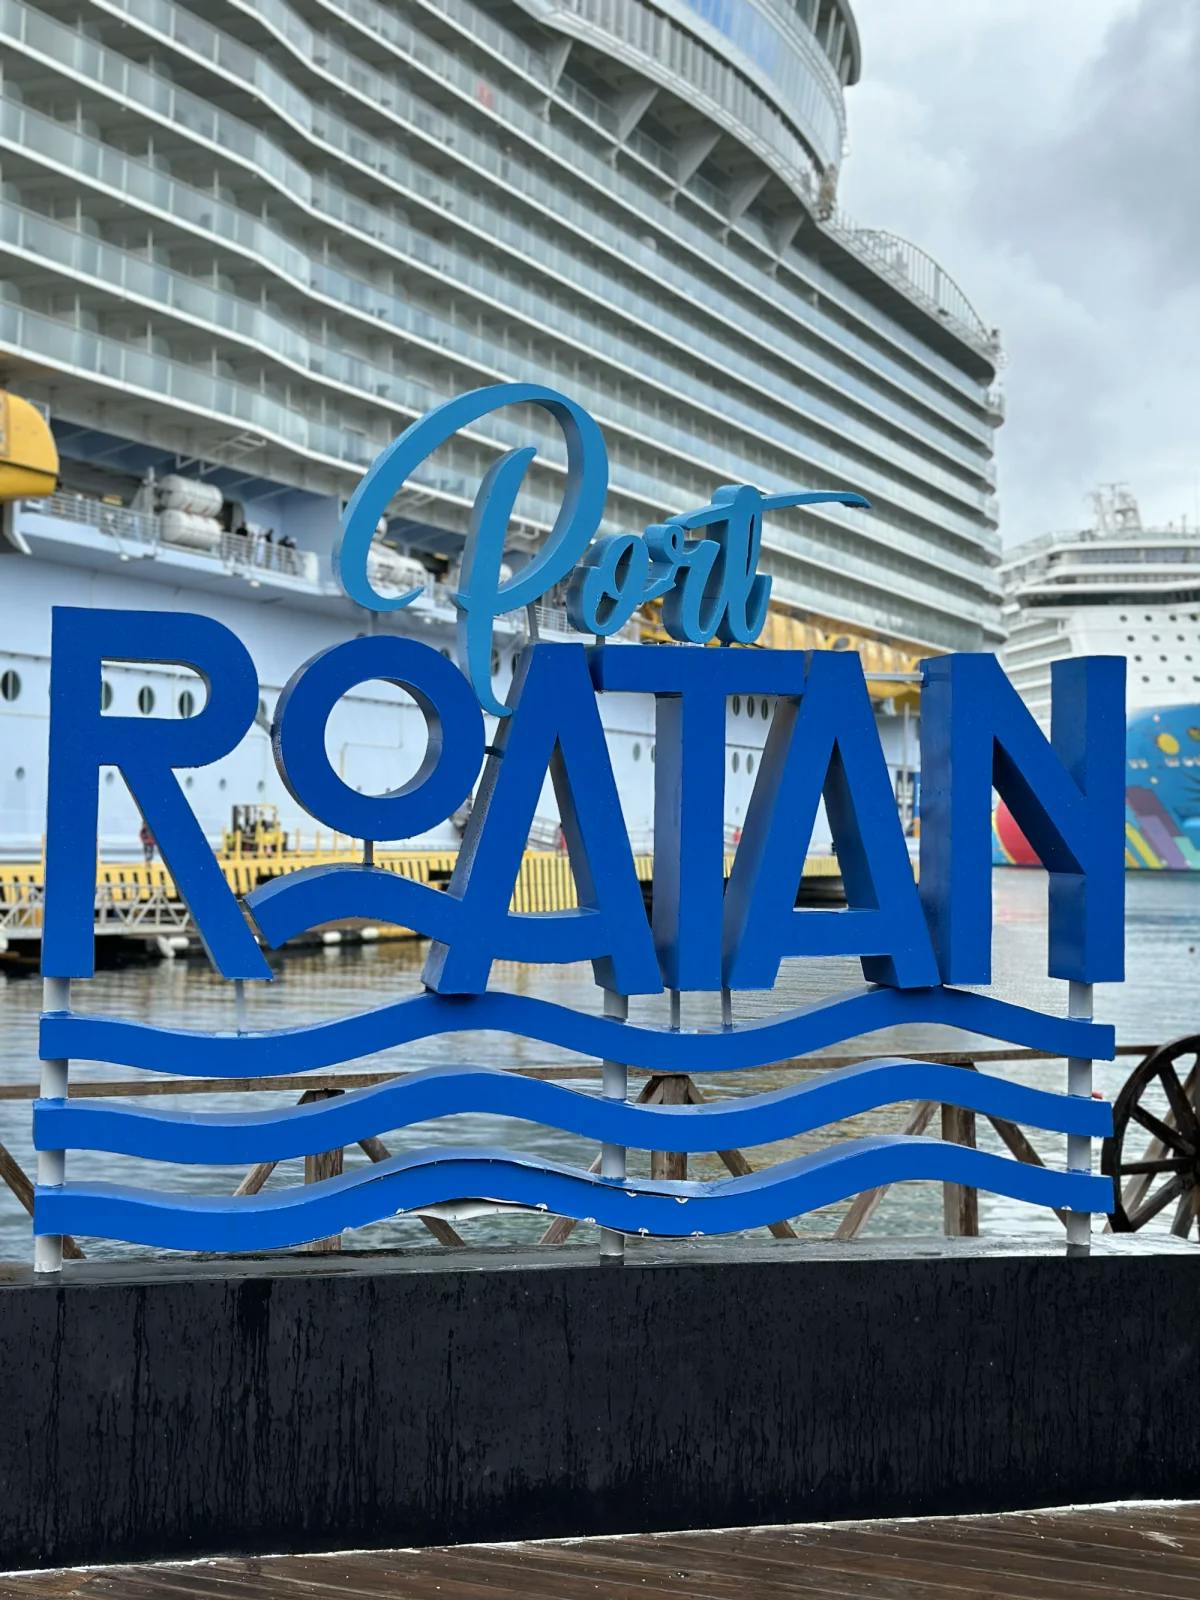 A sign reading "Port Roatan" in front of a cruise ship